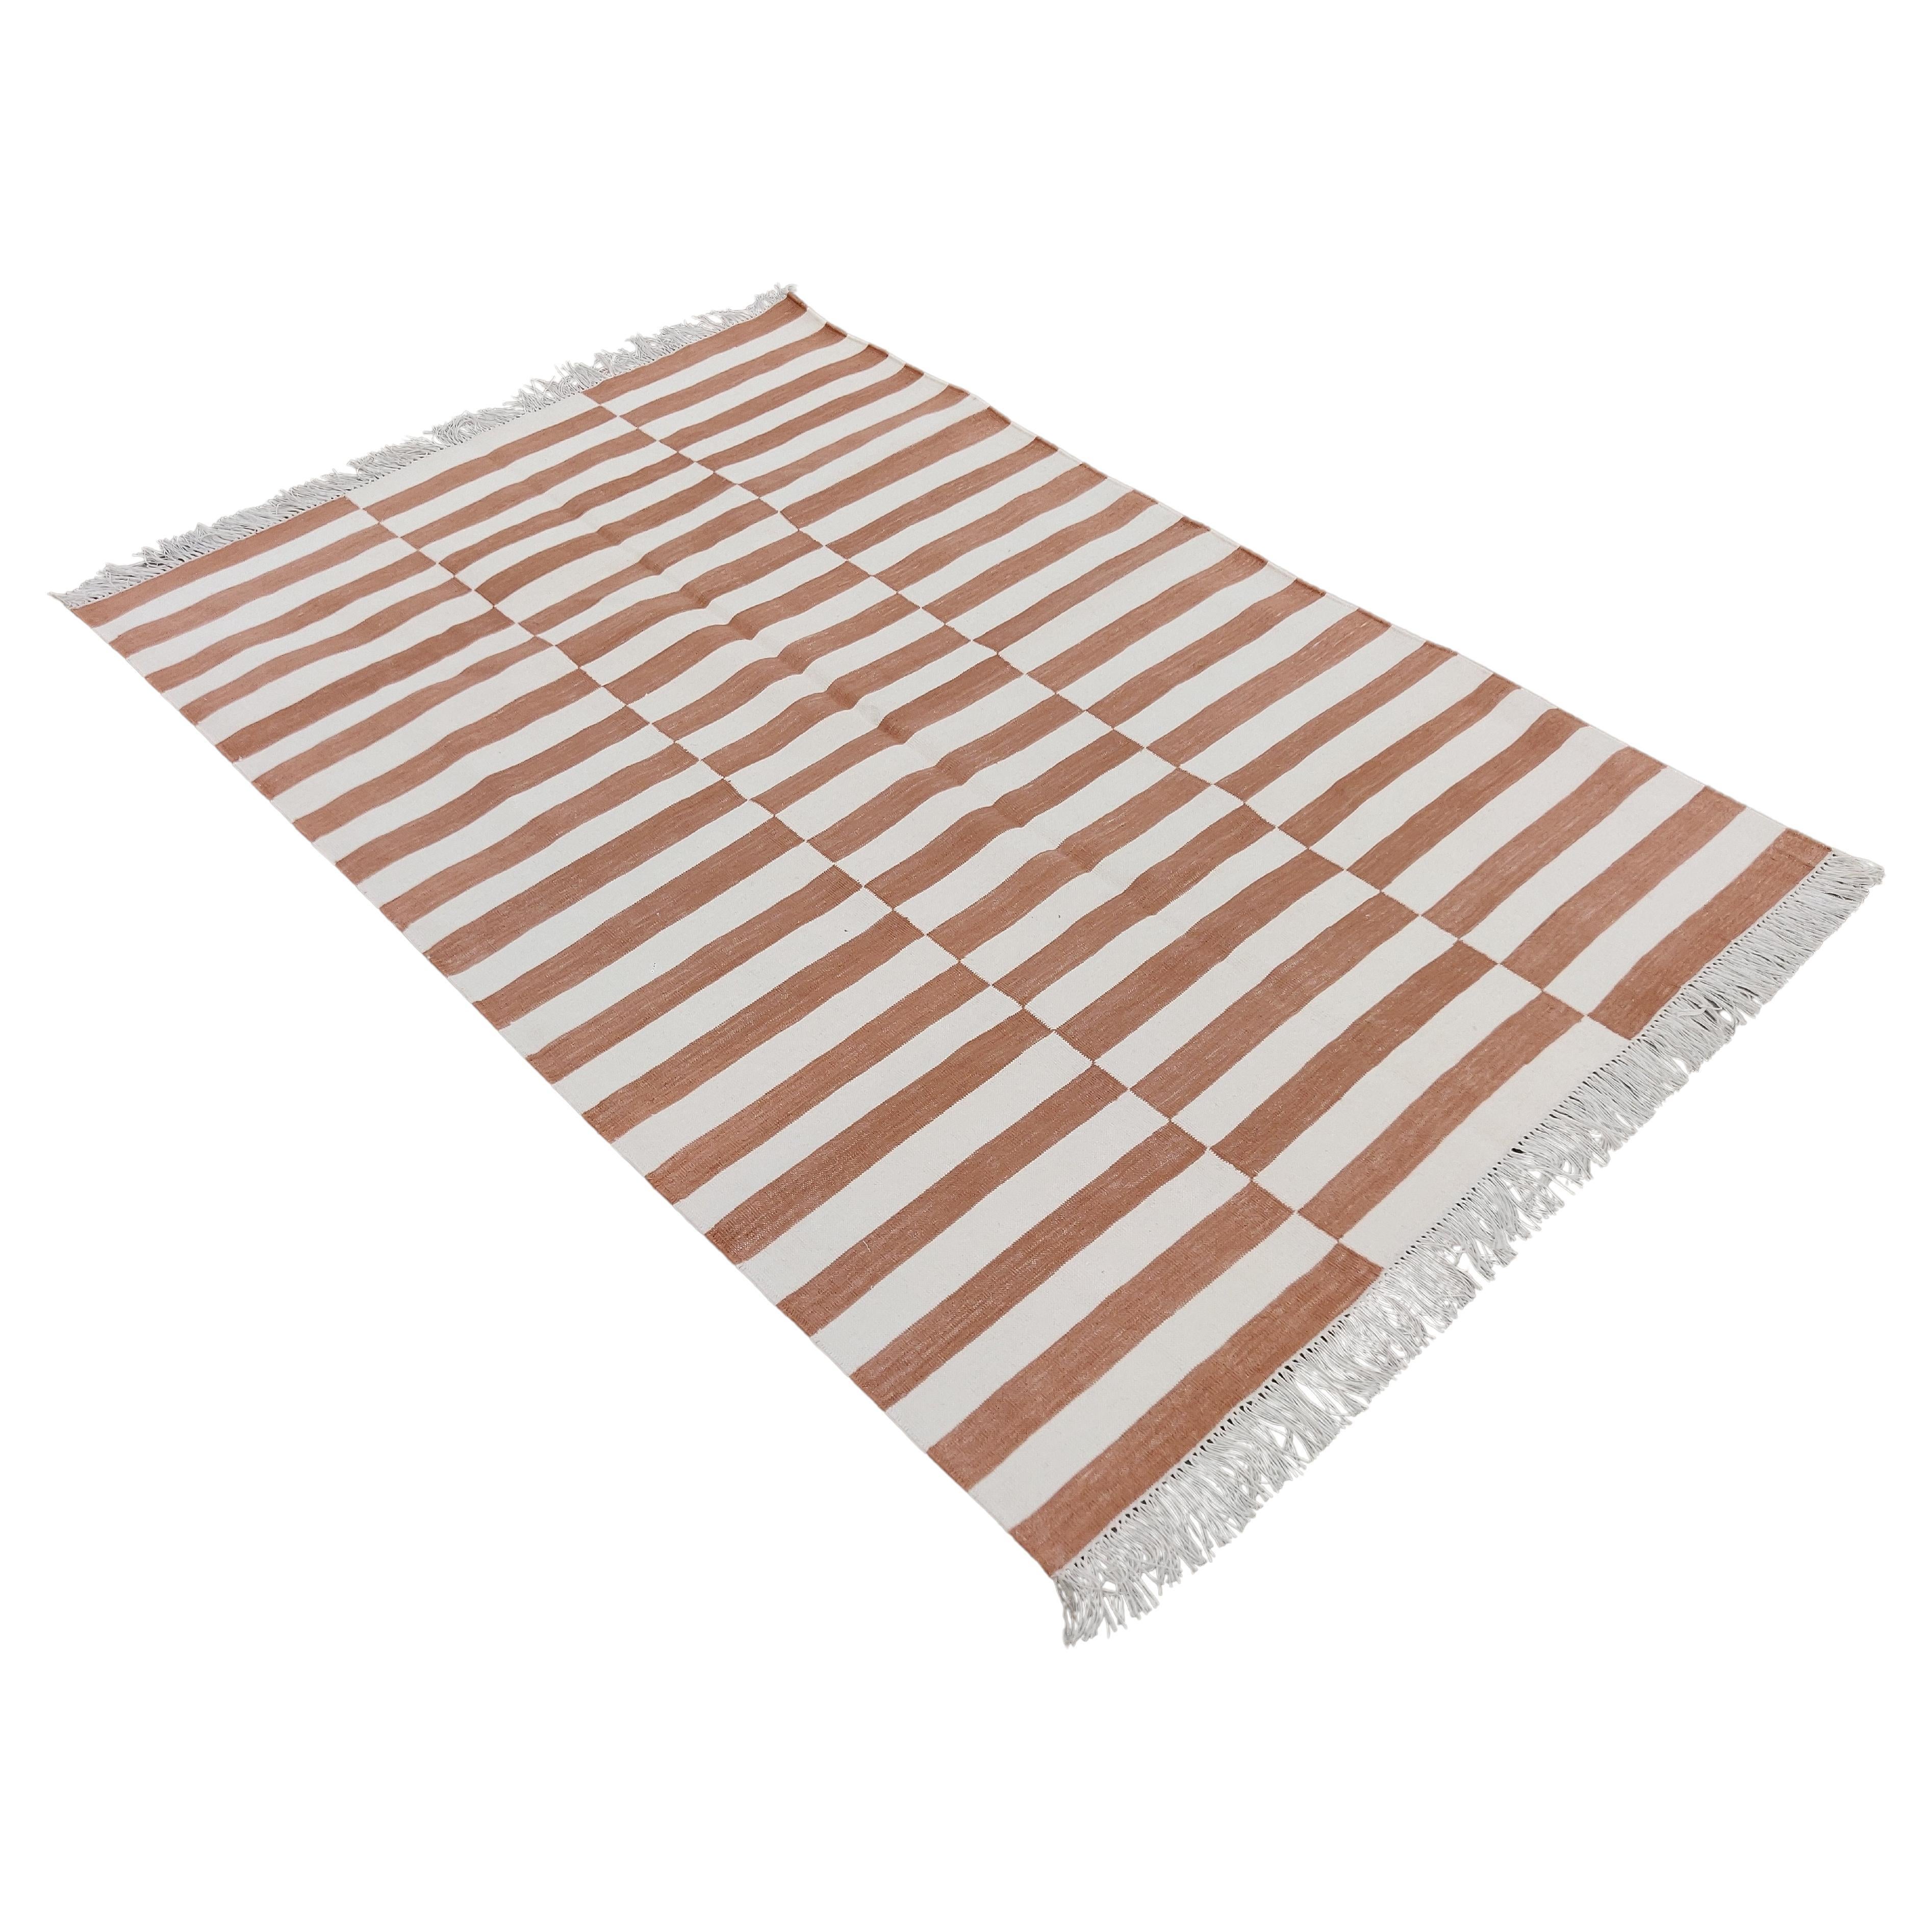 Handmade Cotton Area Flat Weave Rug, 4x6 Tan And White Striped Indian Dhurrie For Sale